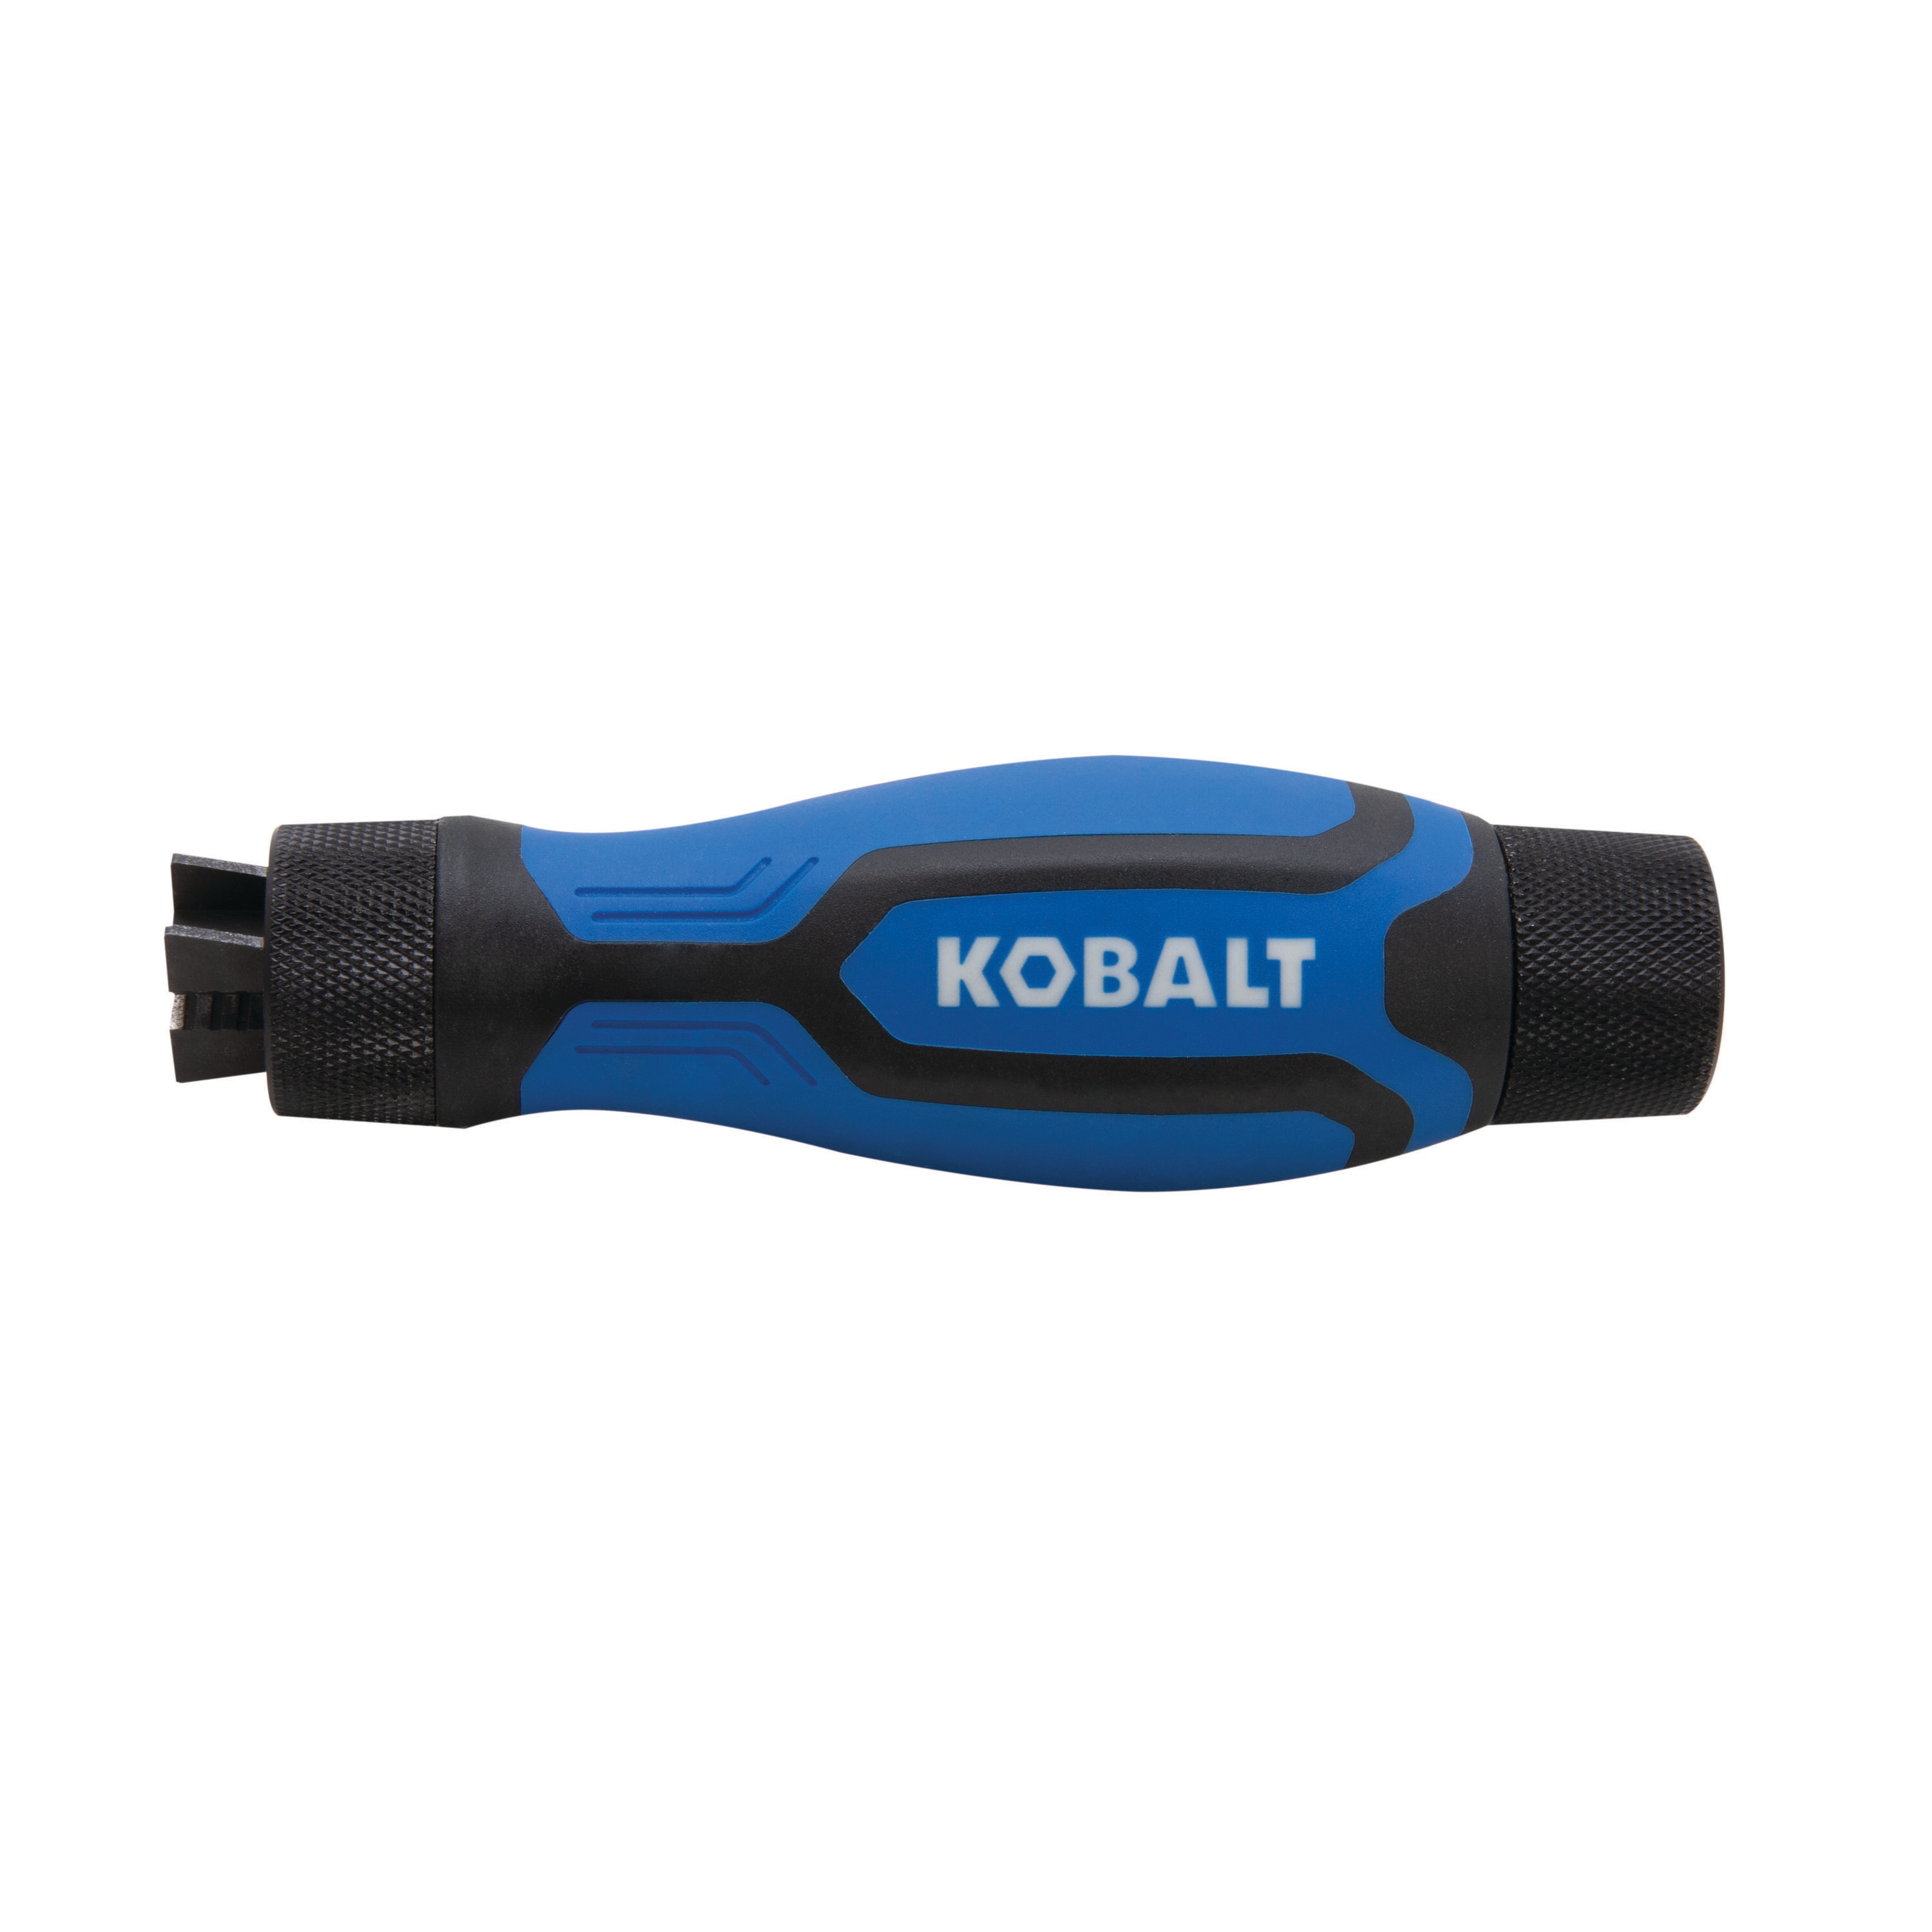 Kobalt 5-in Tooth Lock Jaw File Handle File at Lowes.com